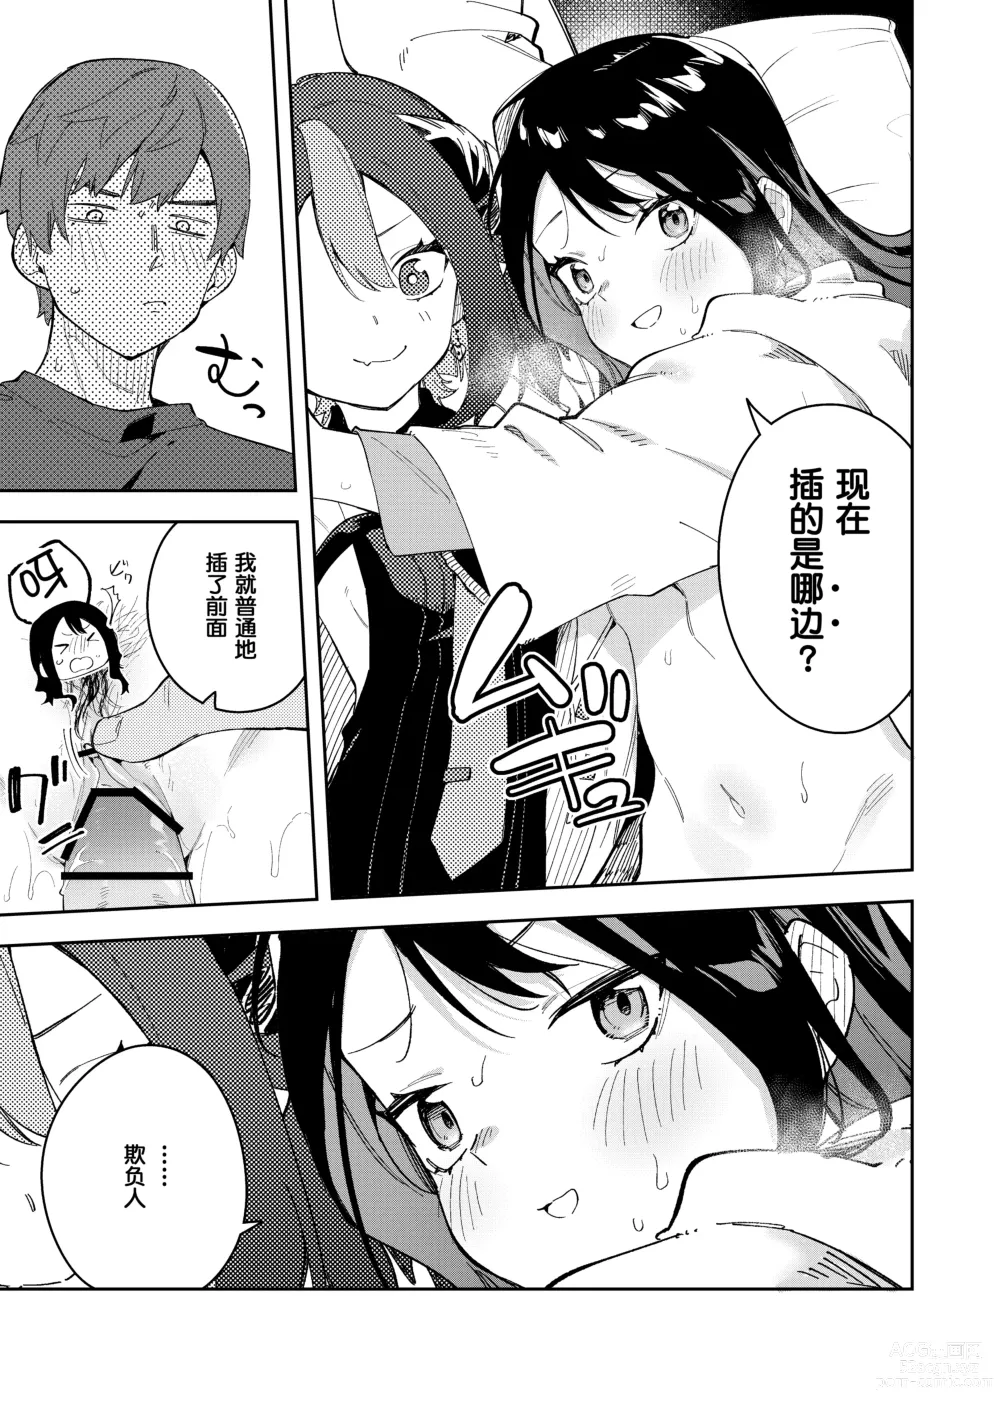 Page 31 of doujinshi 隣人は有名配信者3人目